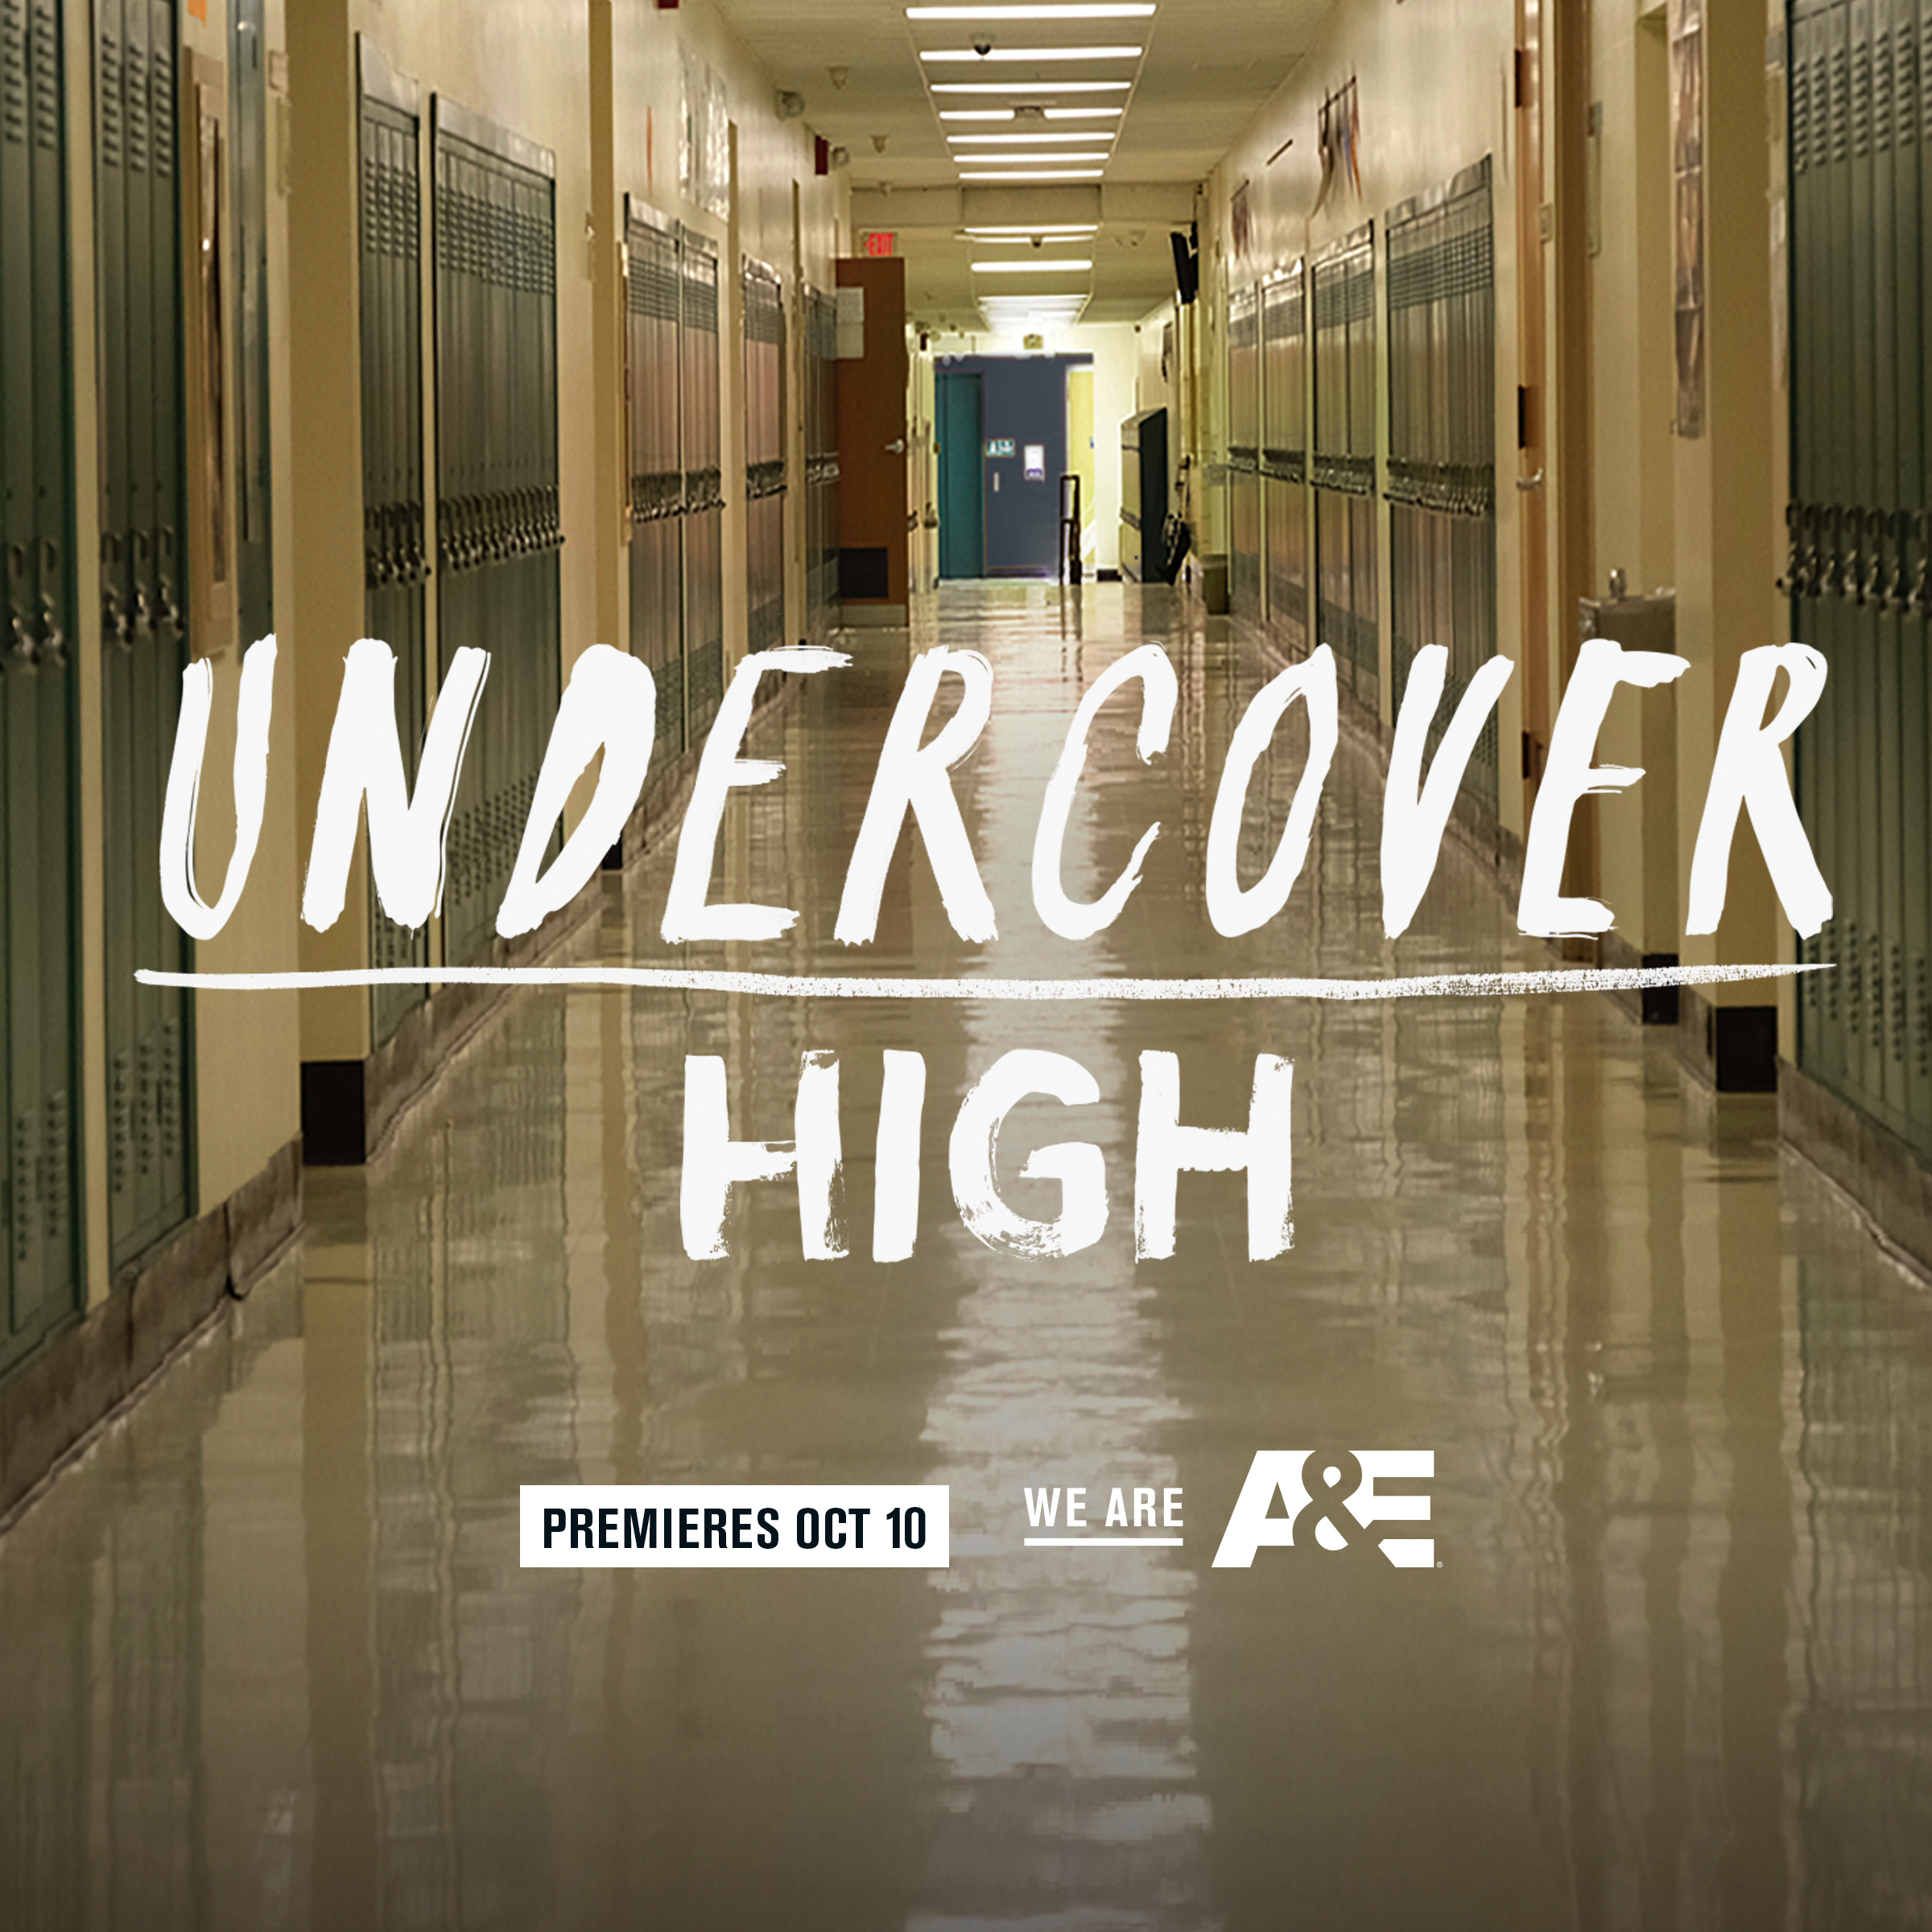 New A&E Docuseries “Undercover High” Premieres Oct. 10